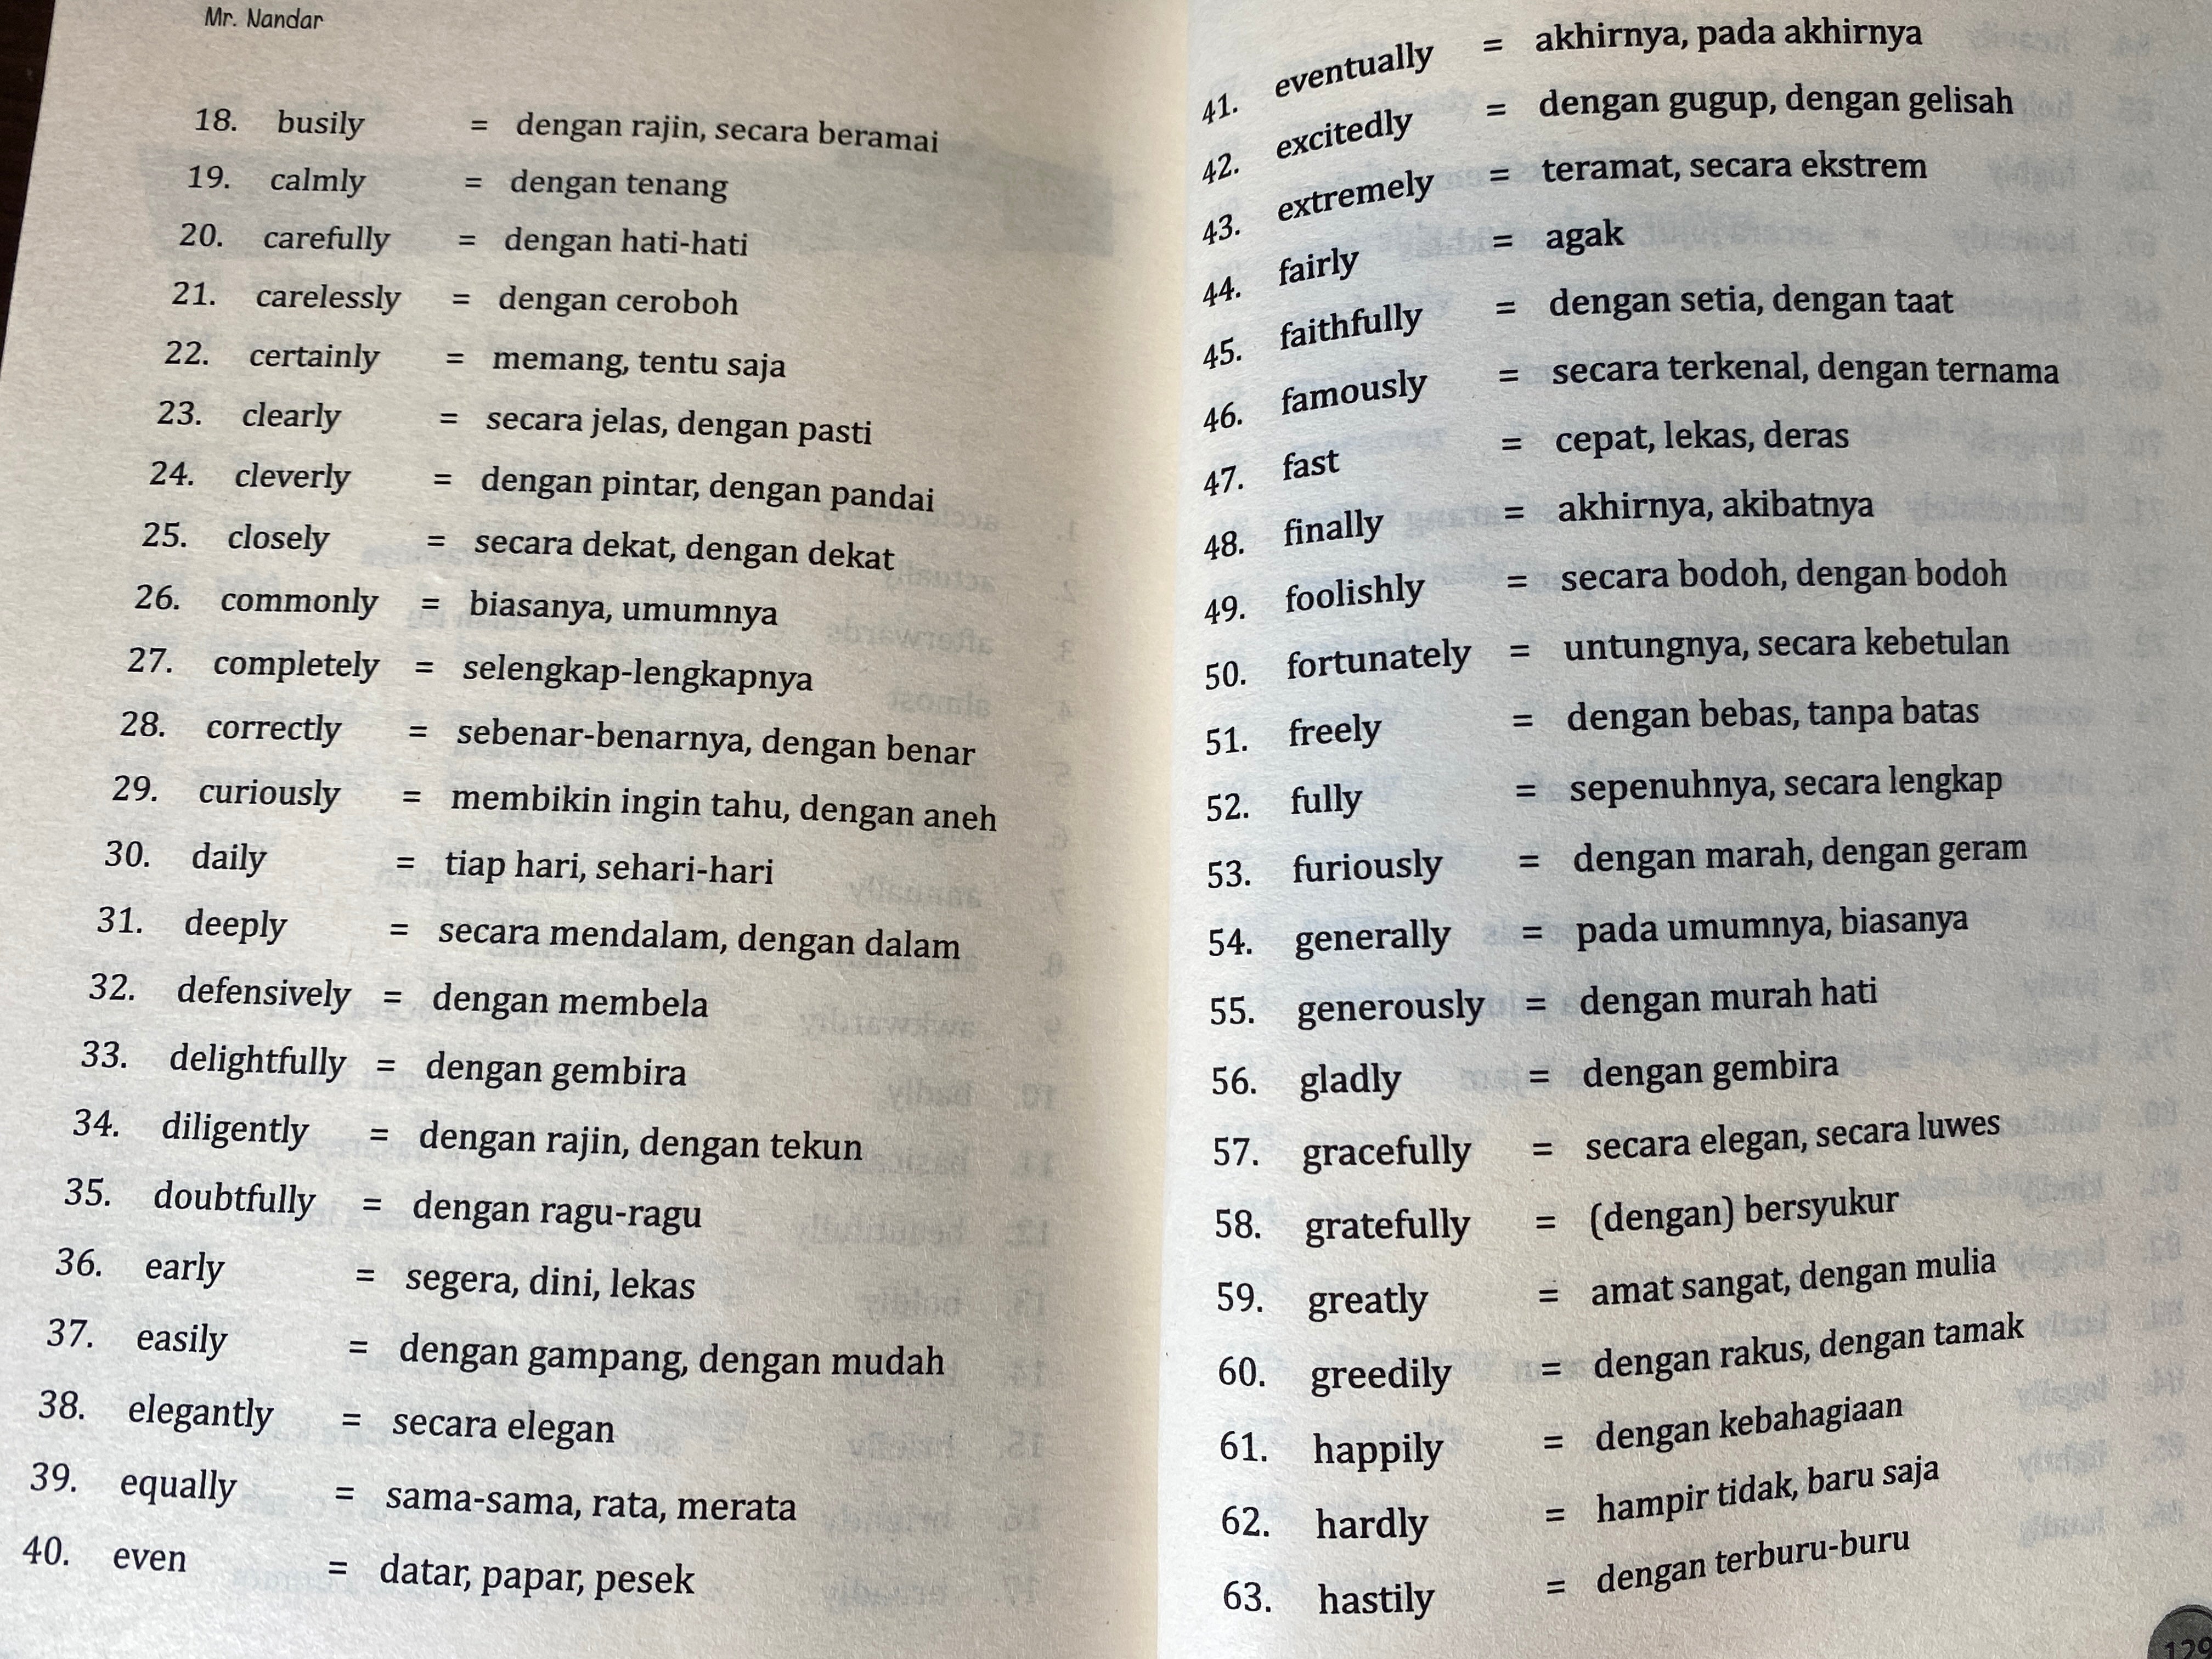 Self-study Indonesian must-have book 52 examples of daily Indonesian conversations and 800 practical Indonesian words English-India bilingual reference